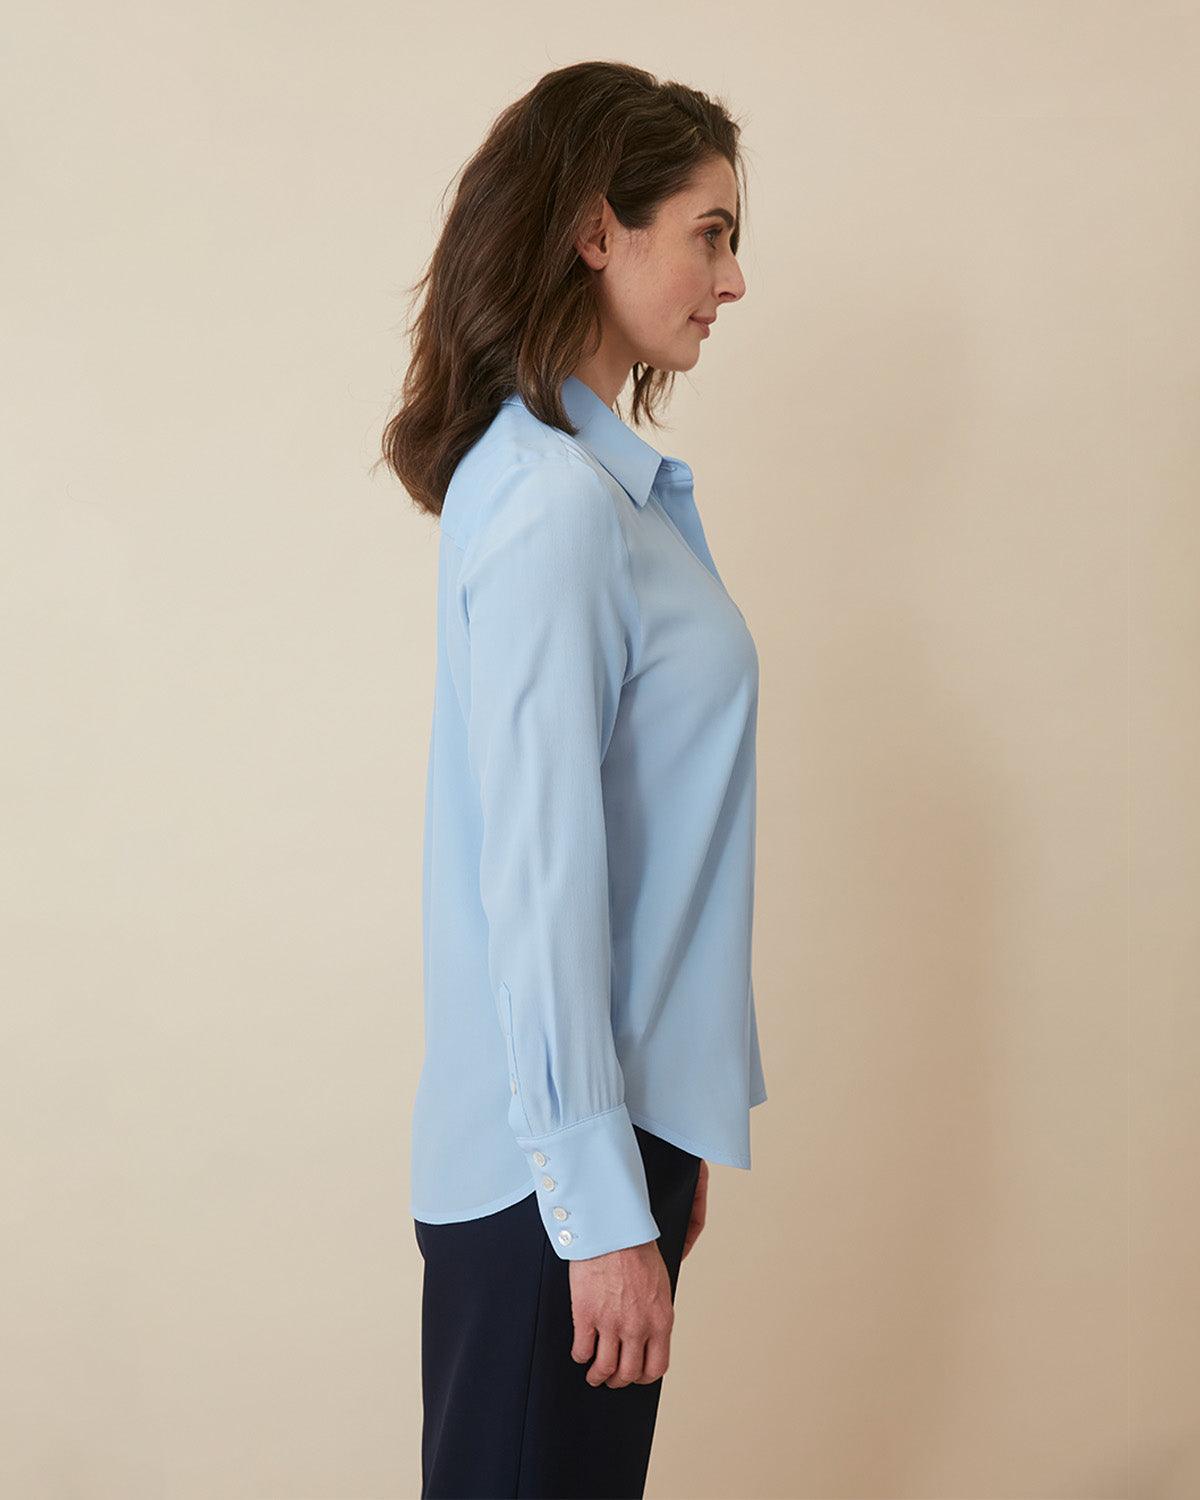 "#color_FRENCH BLUE|Jessica is 5'10", wearing a size S